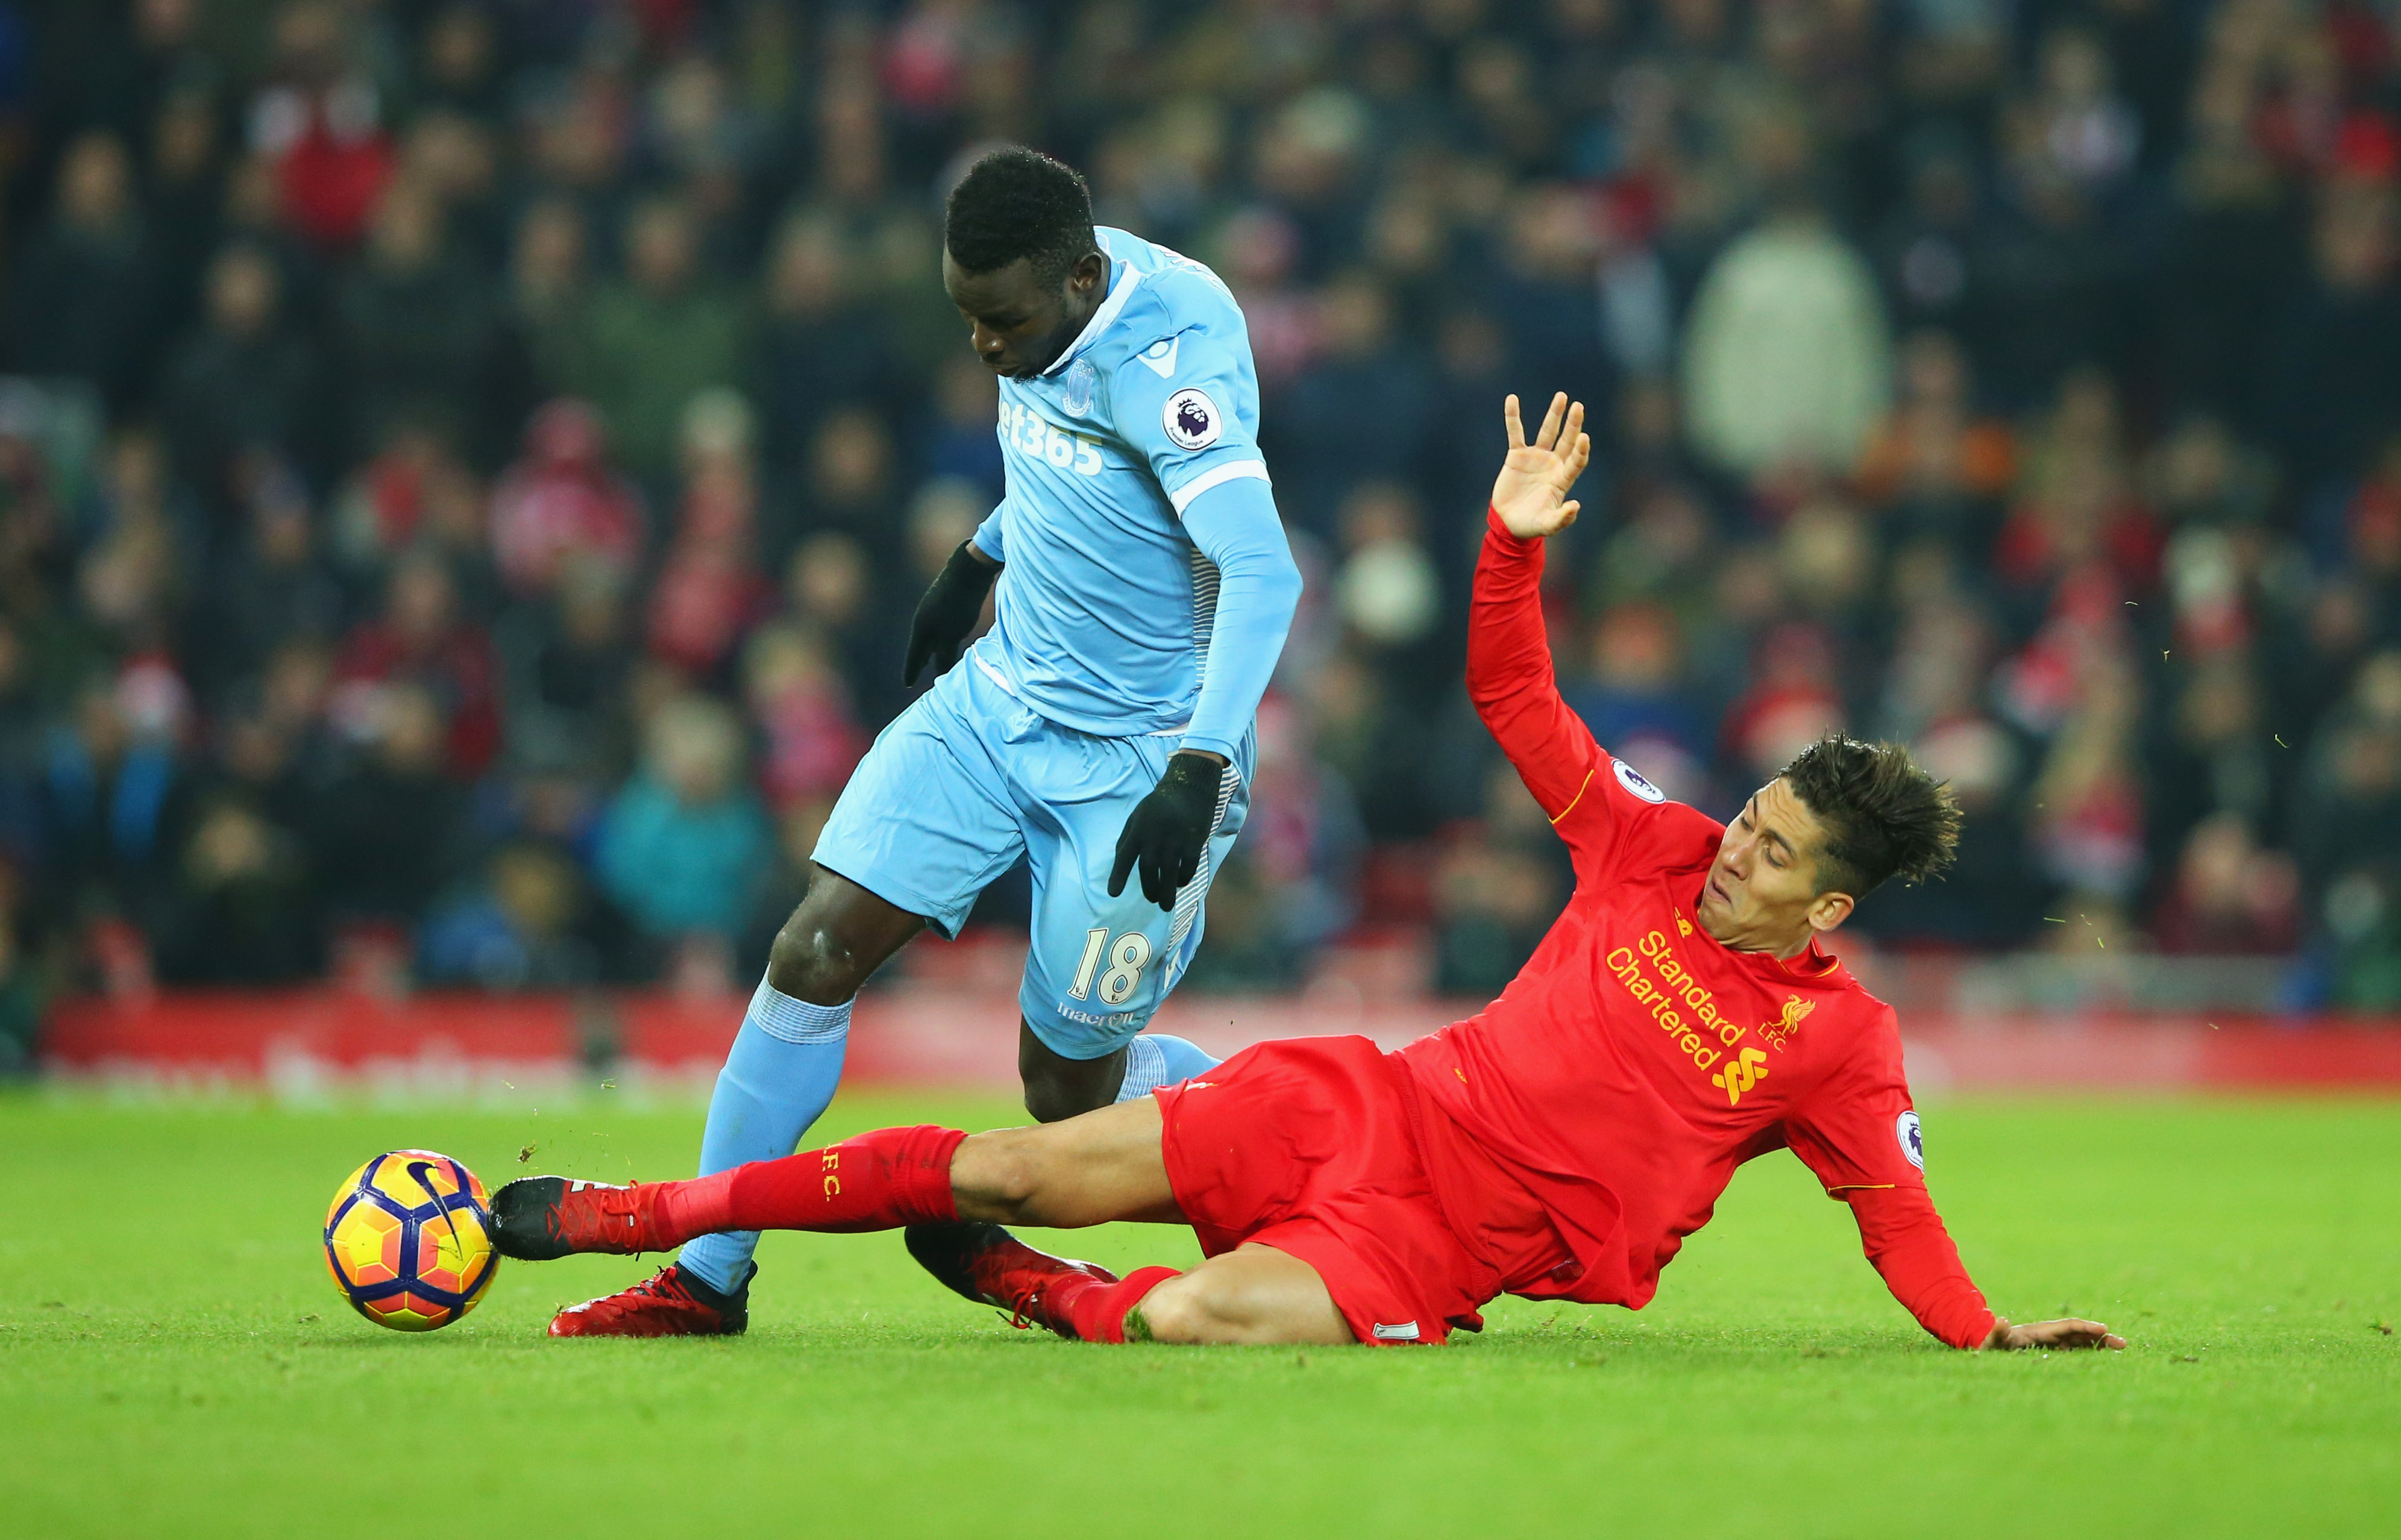 LIVERPOOL, ENGLAND - DECEMBER 27:  Mame Biram Diouf of Stoke City is challenged by Roberto Firmino of Liverpool during the Premier League match between Liverpool and Stoke City at Anfield on December 27, 2016 in Liverpool, England.  (Photo by Alex Livesey/Getty Images)